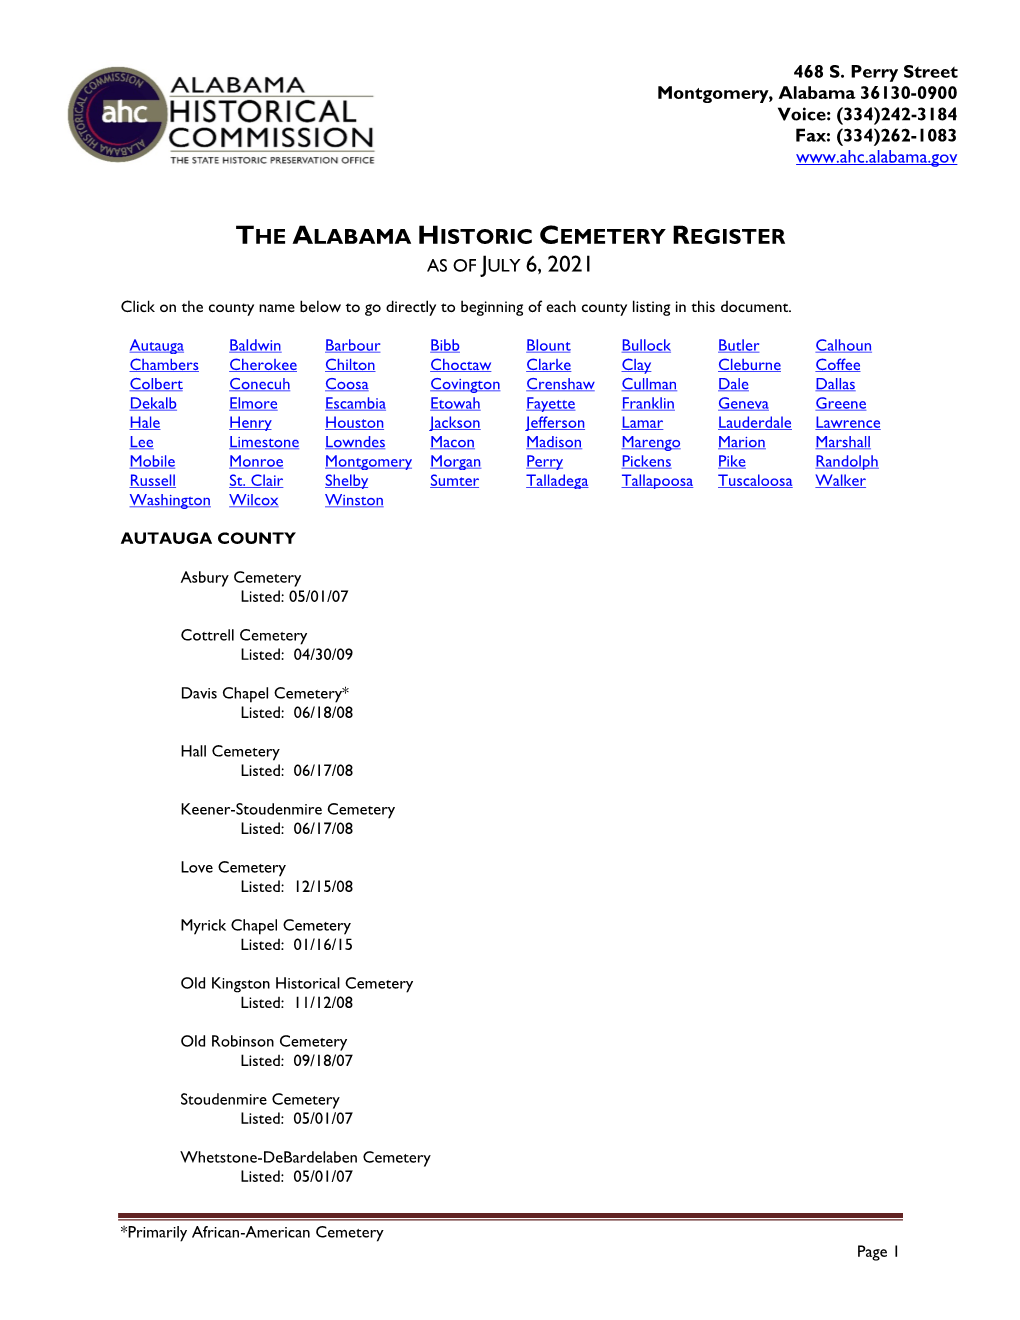 The Alabama Historic Cemetery Register As of July 6, 2021